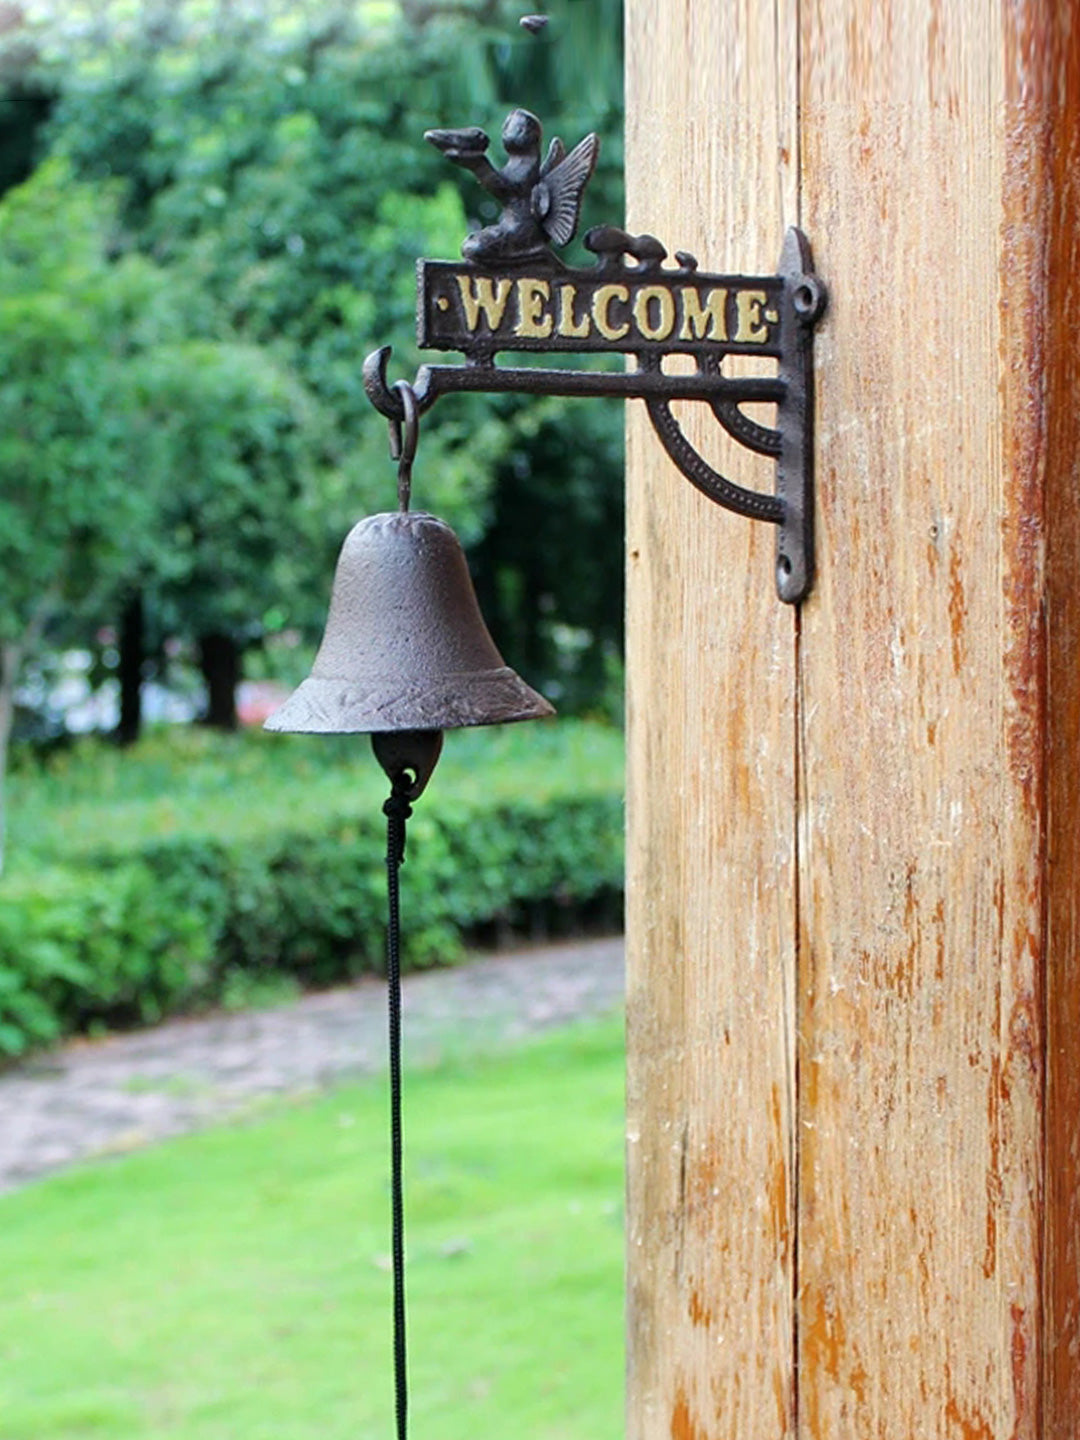 Welcome - Cast Iron Wall Mounted Bell